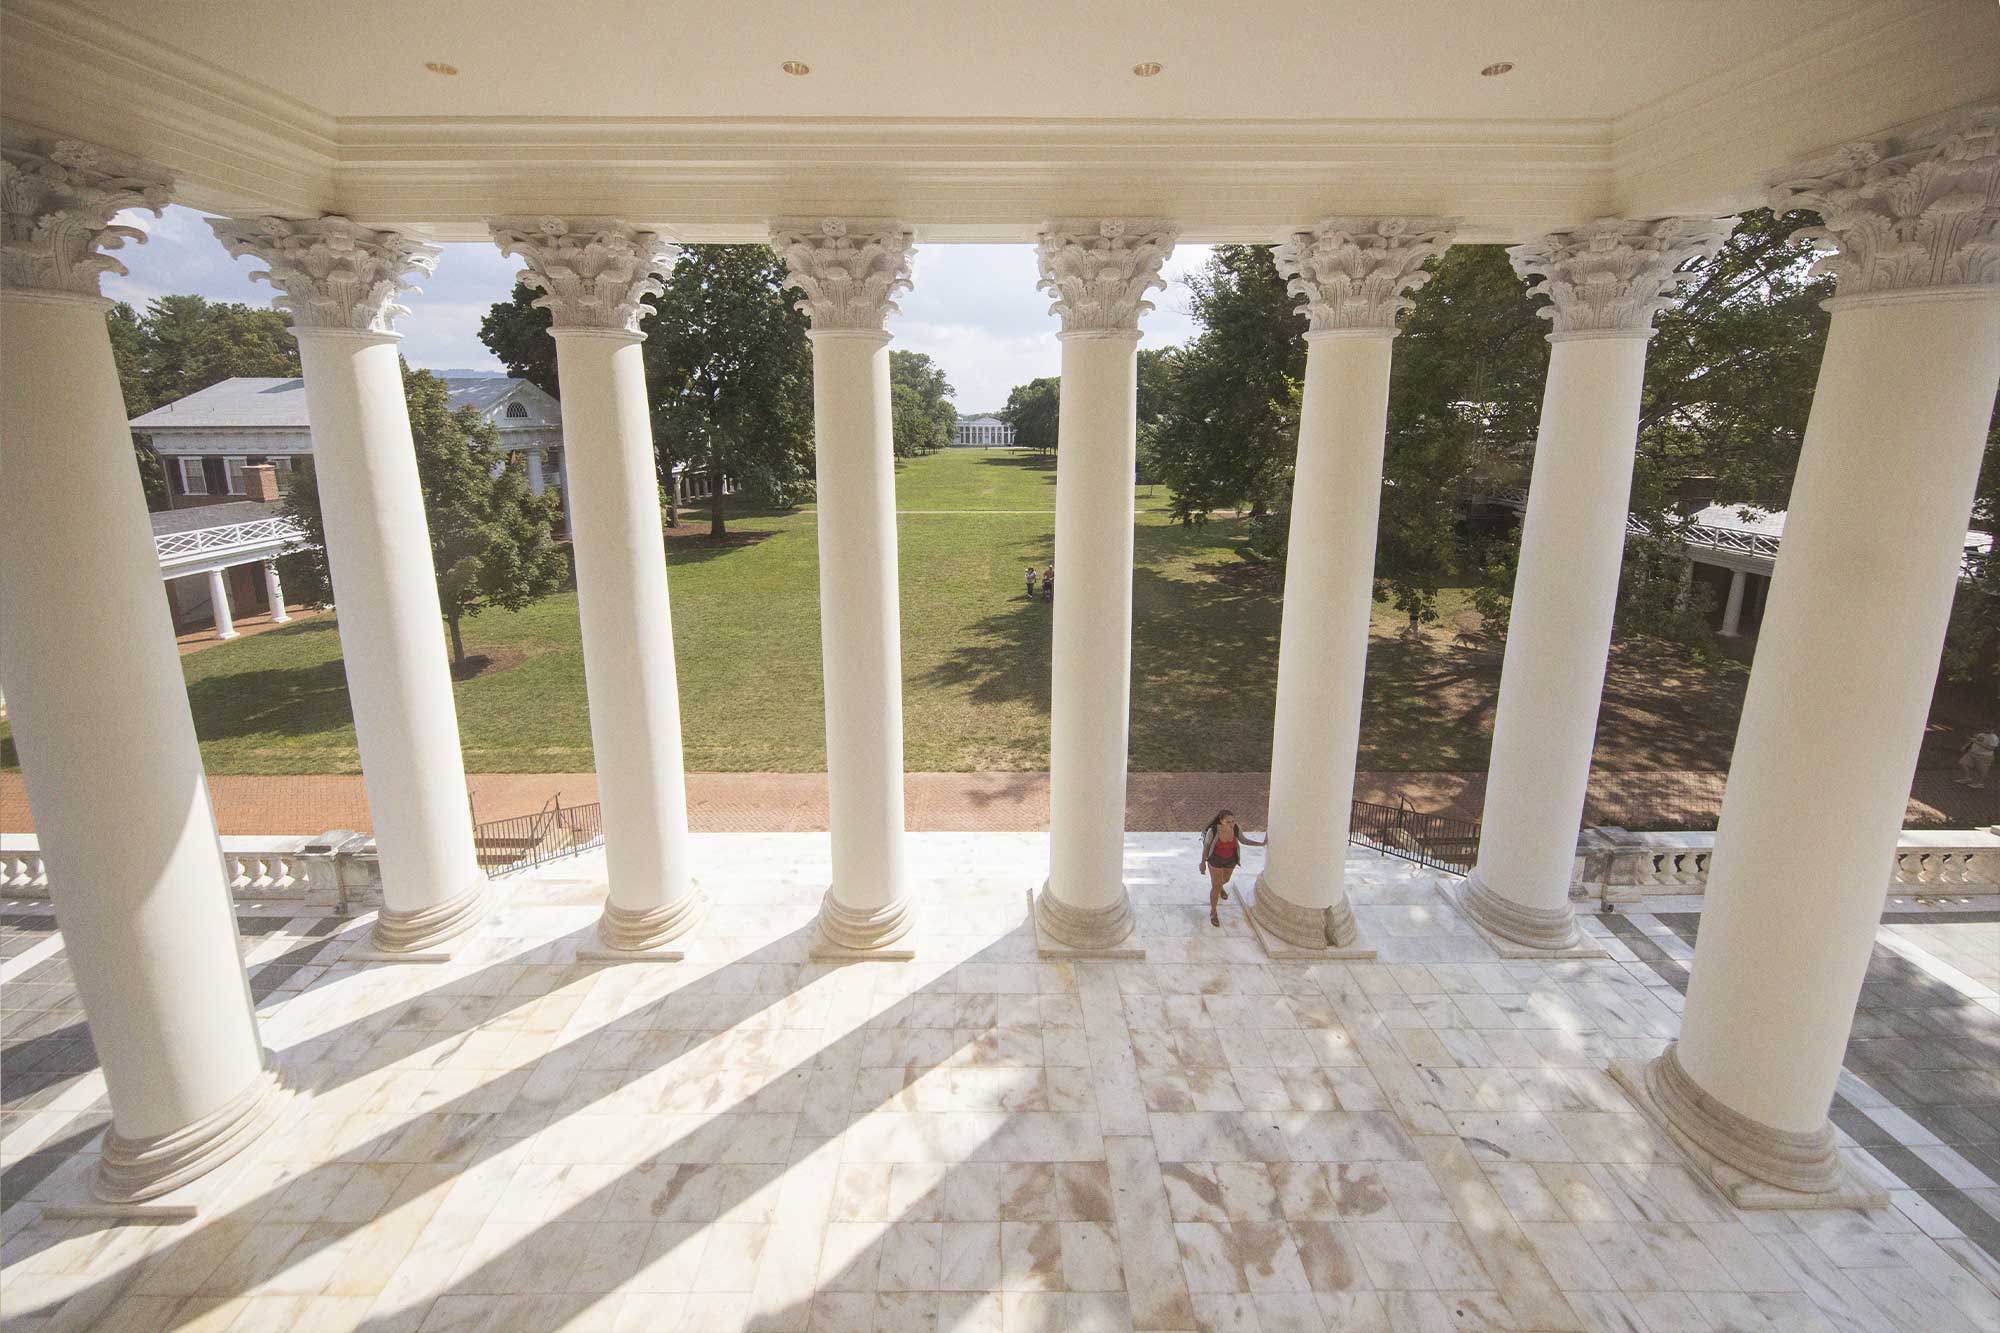 The Lawn is visible through the columns of the Rotunda